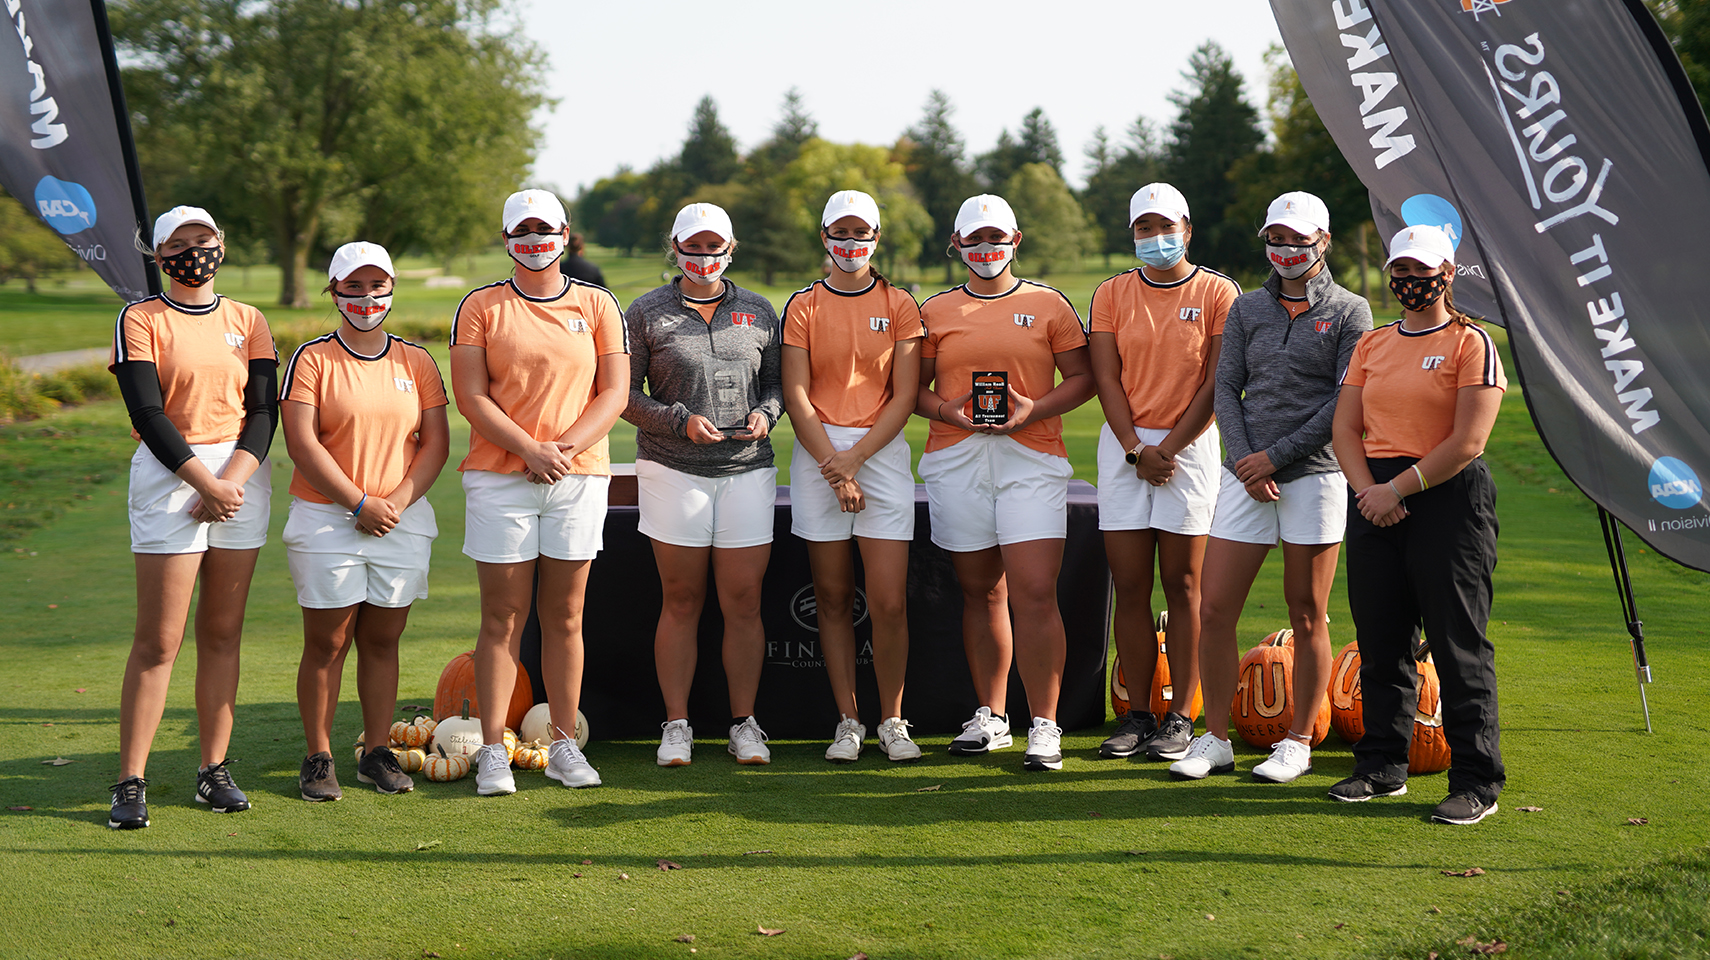 Women's Golf team with second place trophies.